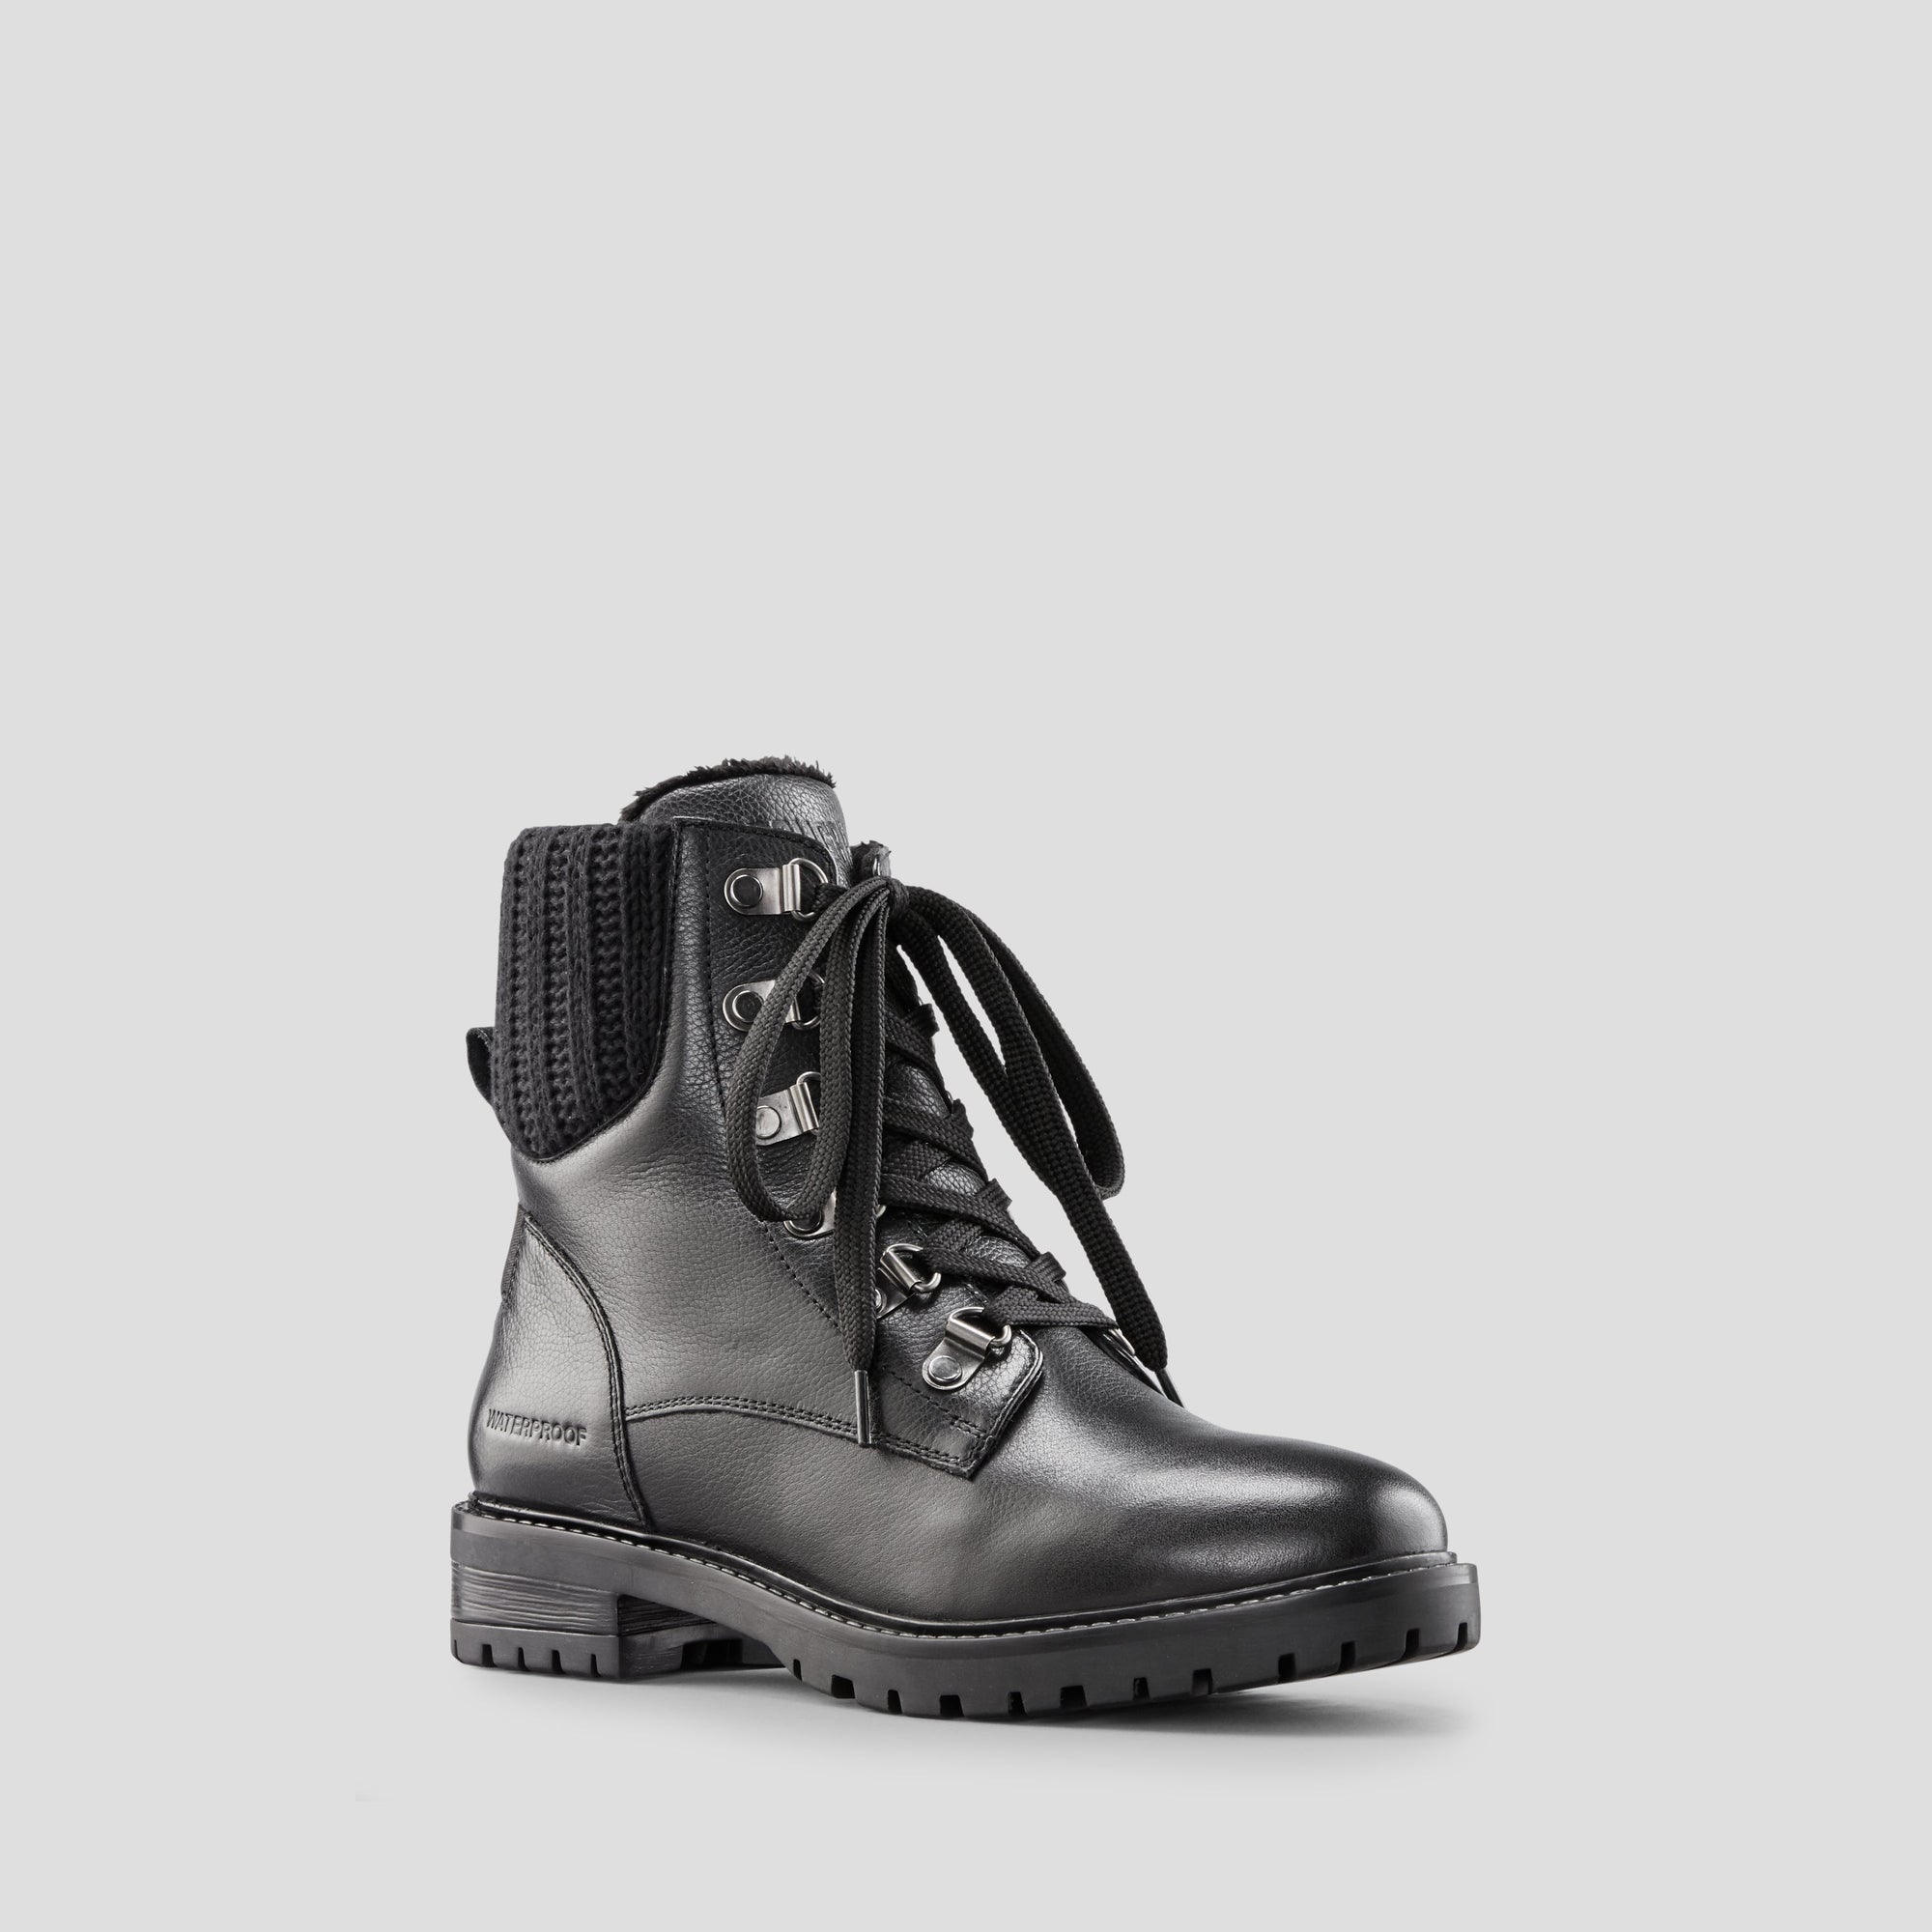 Kudos Leather Waterproof Winter Boot - Color Black